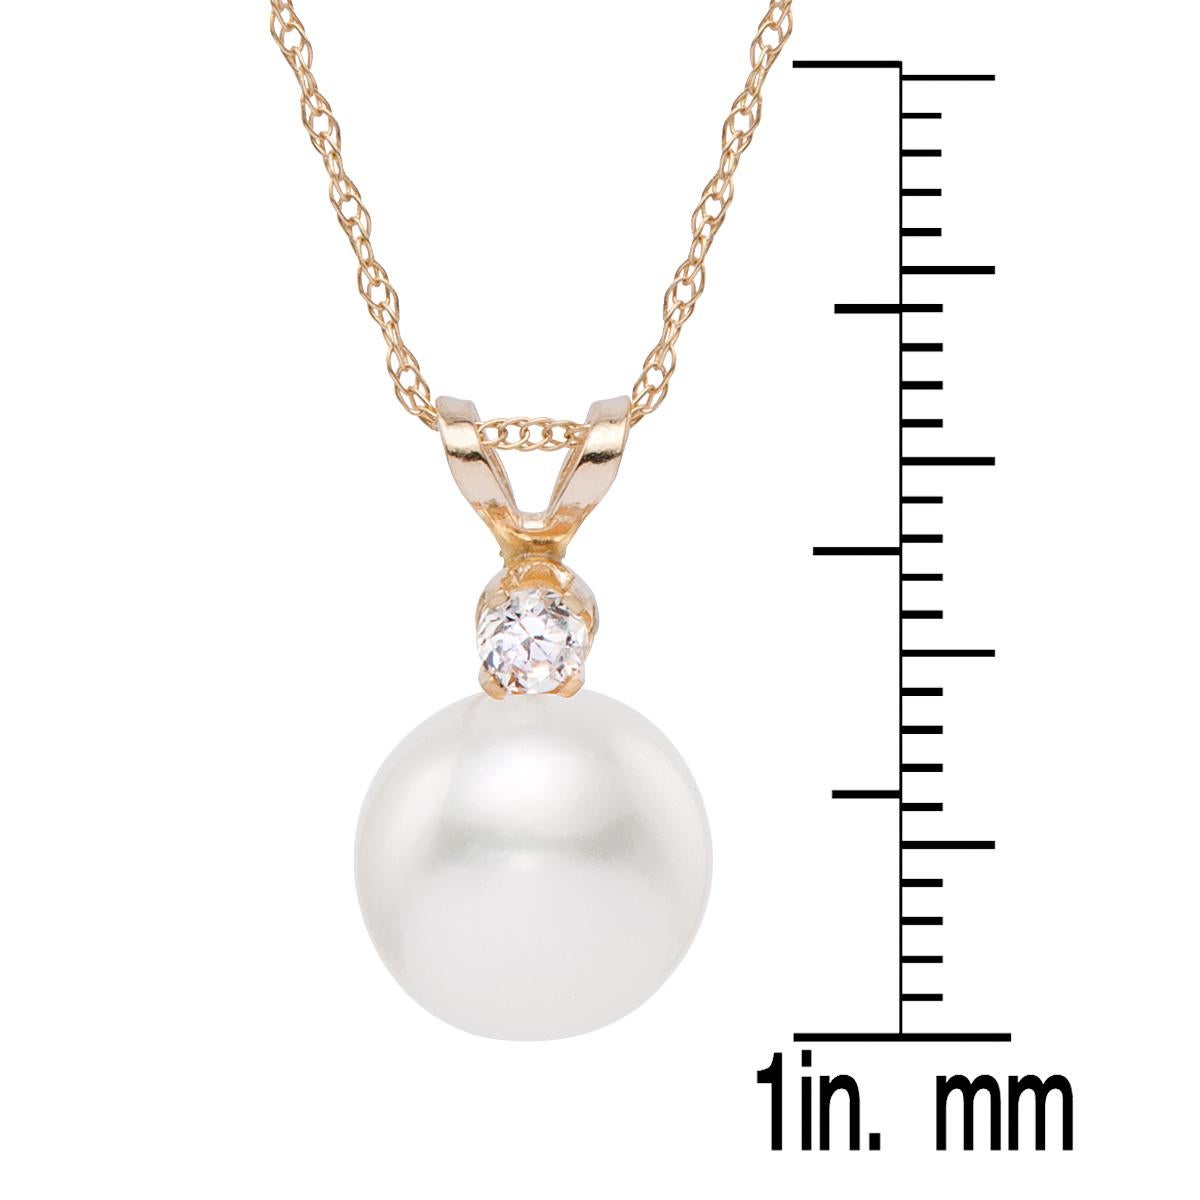 A beautiful cultured pearl pendant necklace with gorgeous 14K gold mounting. This pearl pendant is of AAA quality with mirror luster.  Sparkling Genuine Diamond (H-I, I2) 5pt. (total) and High Luster Cultured Freshwater Pearls with 14k Gold Chain